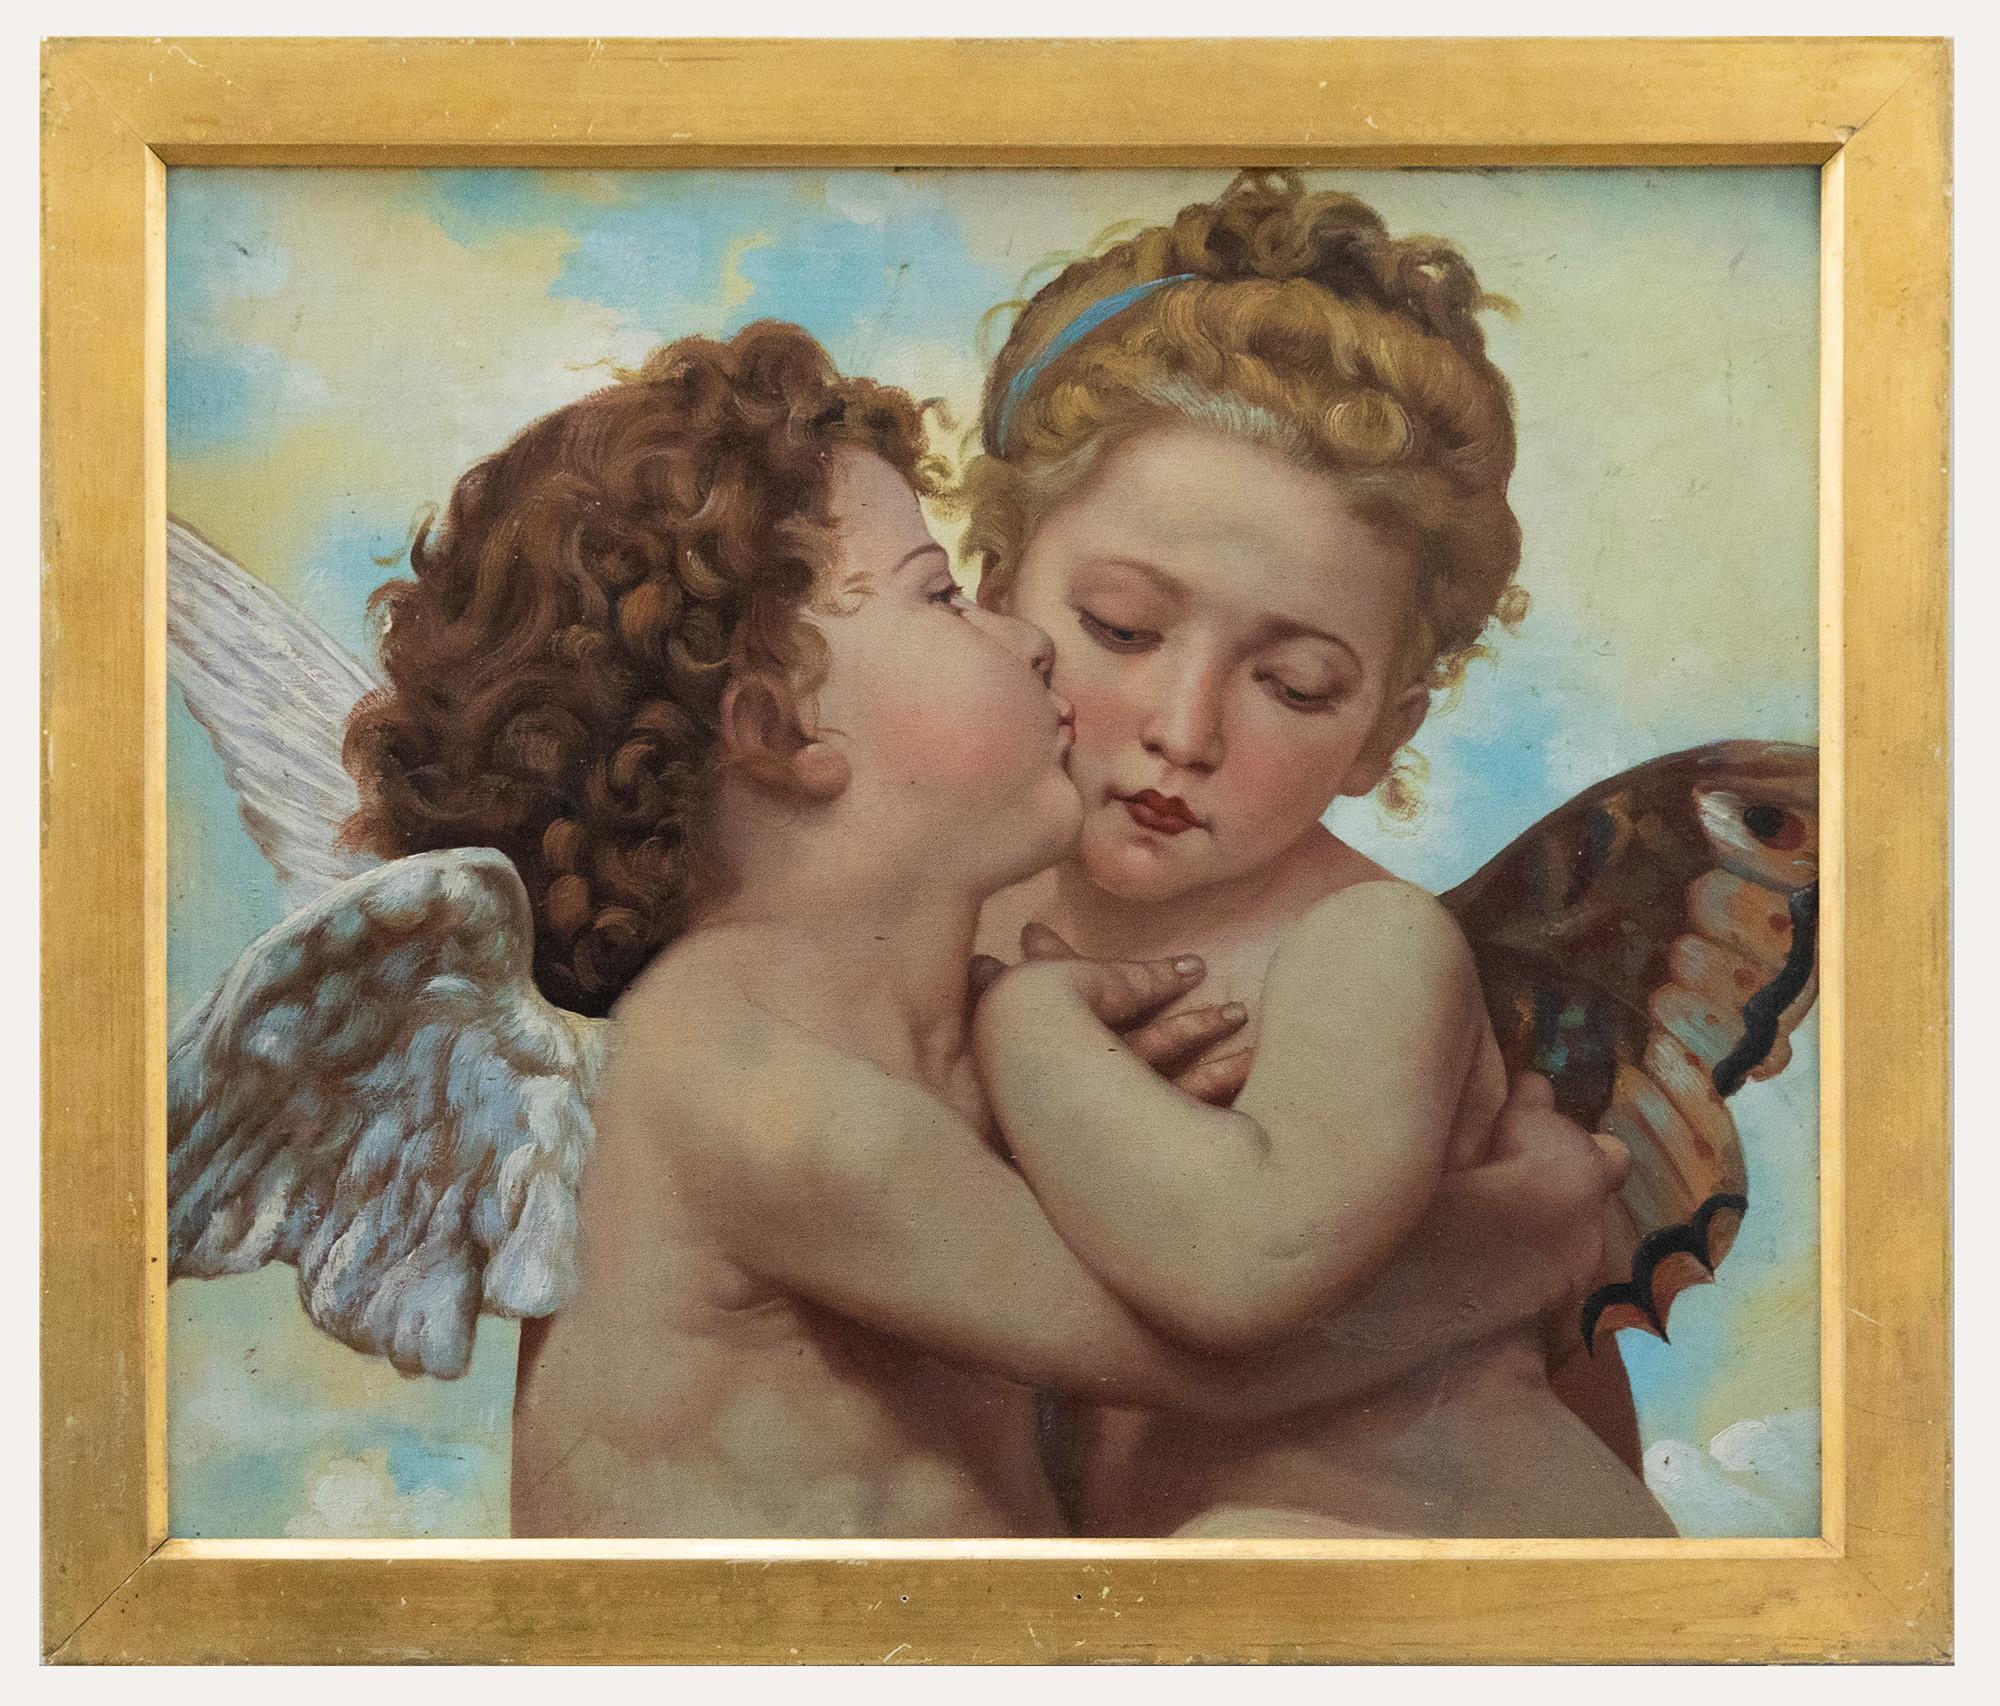 Unknown Figurative Painting - After William-Adolphe Bouguereau - Framed 20th Century Oil, L'Amour et Psyche